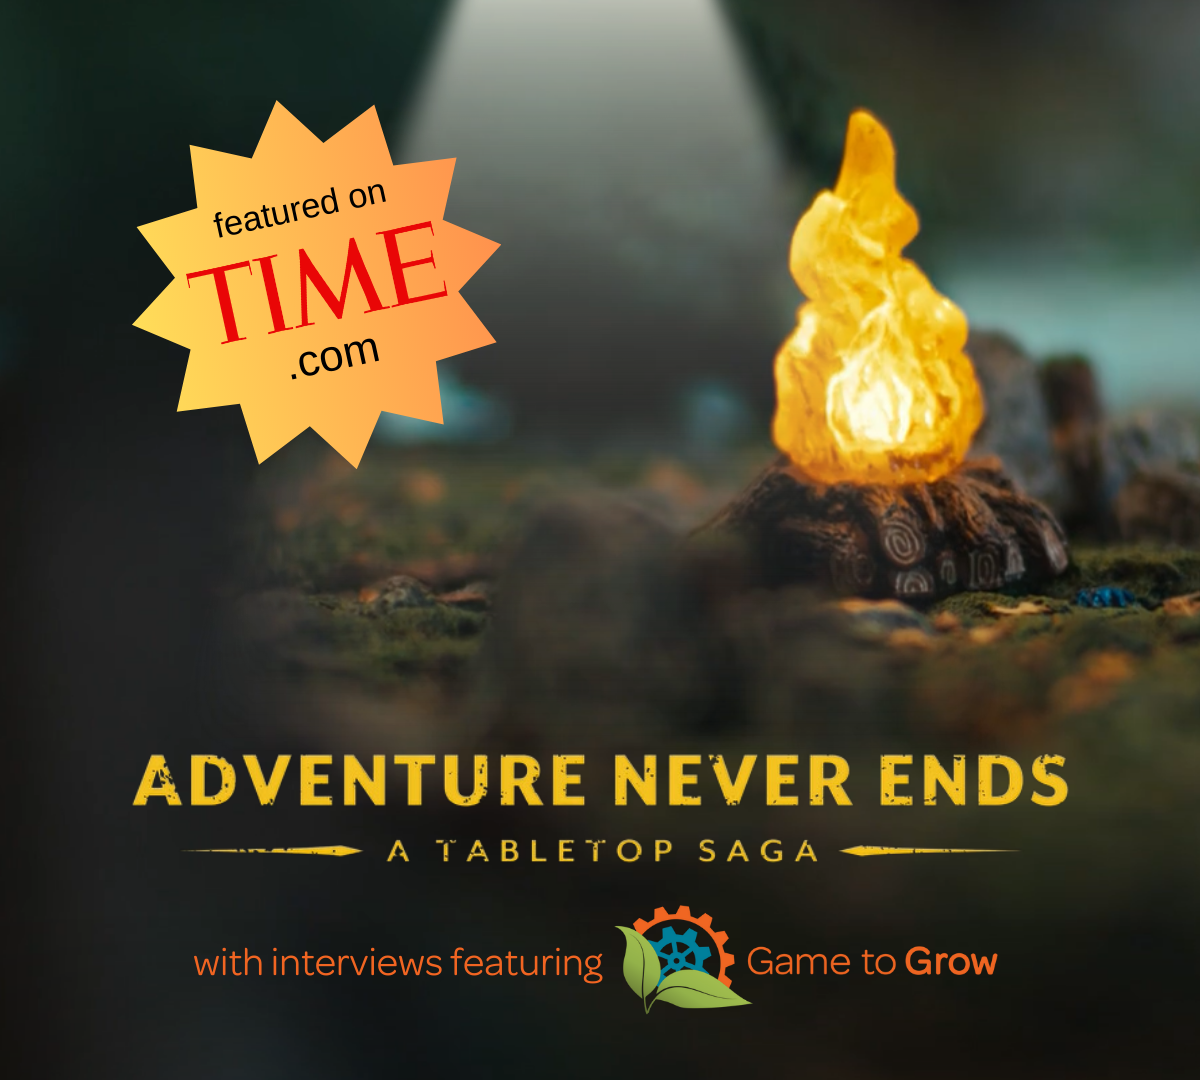 Featured on TIME.com, Adventure Never Ends: A Tabletop Saga also featuring interviews from Game to Grow